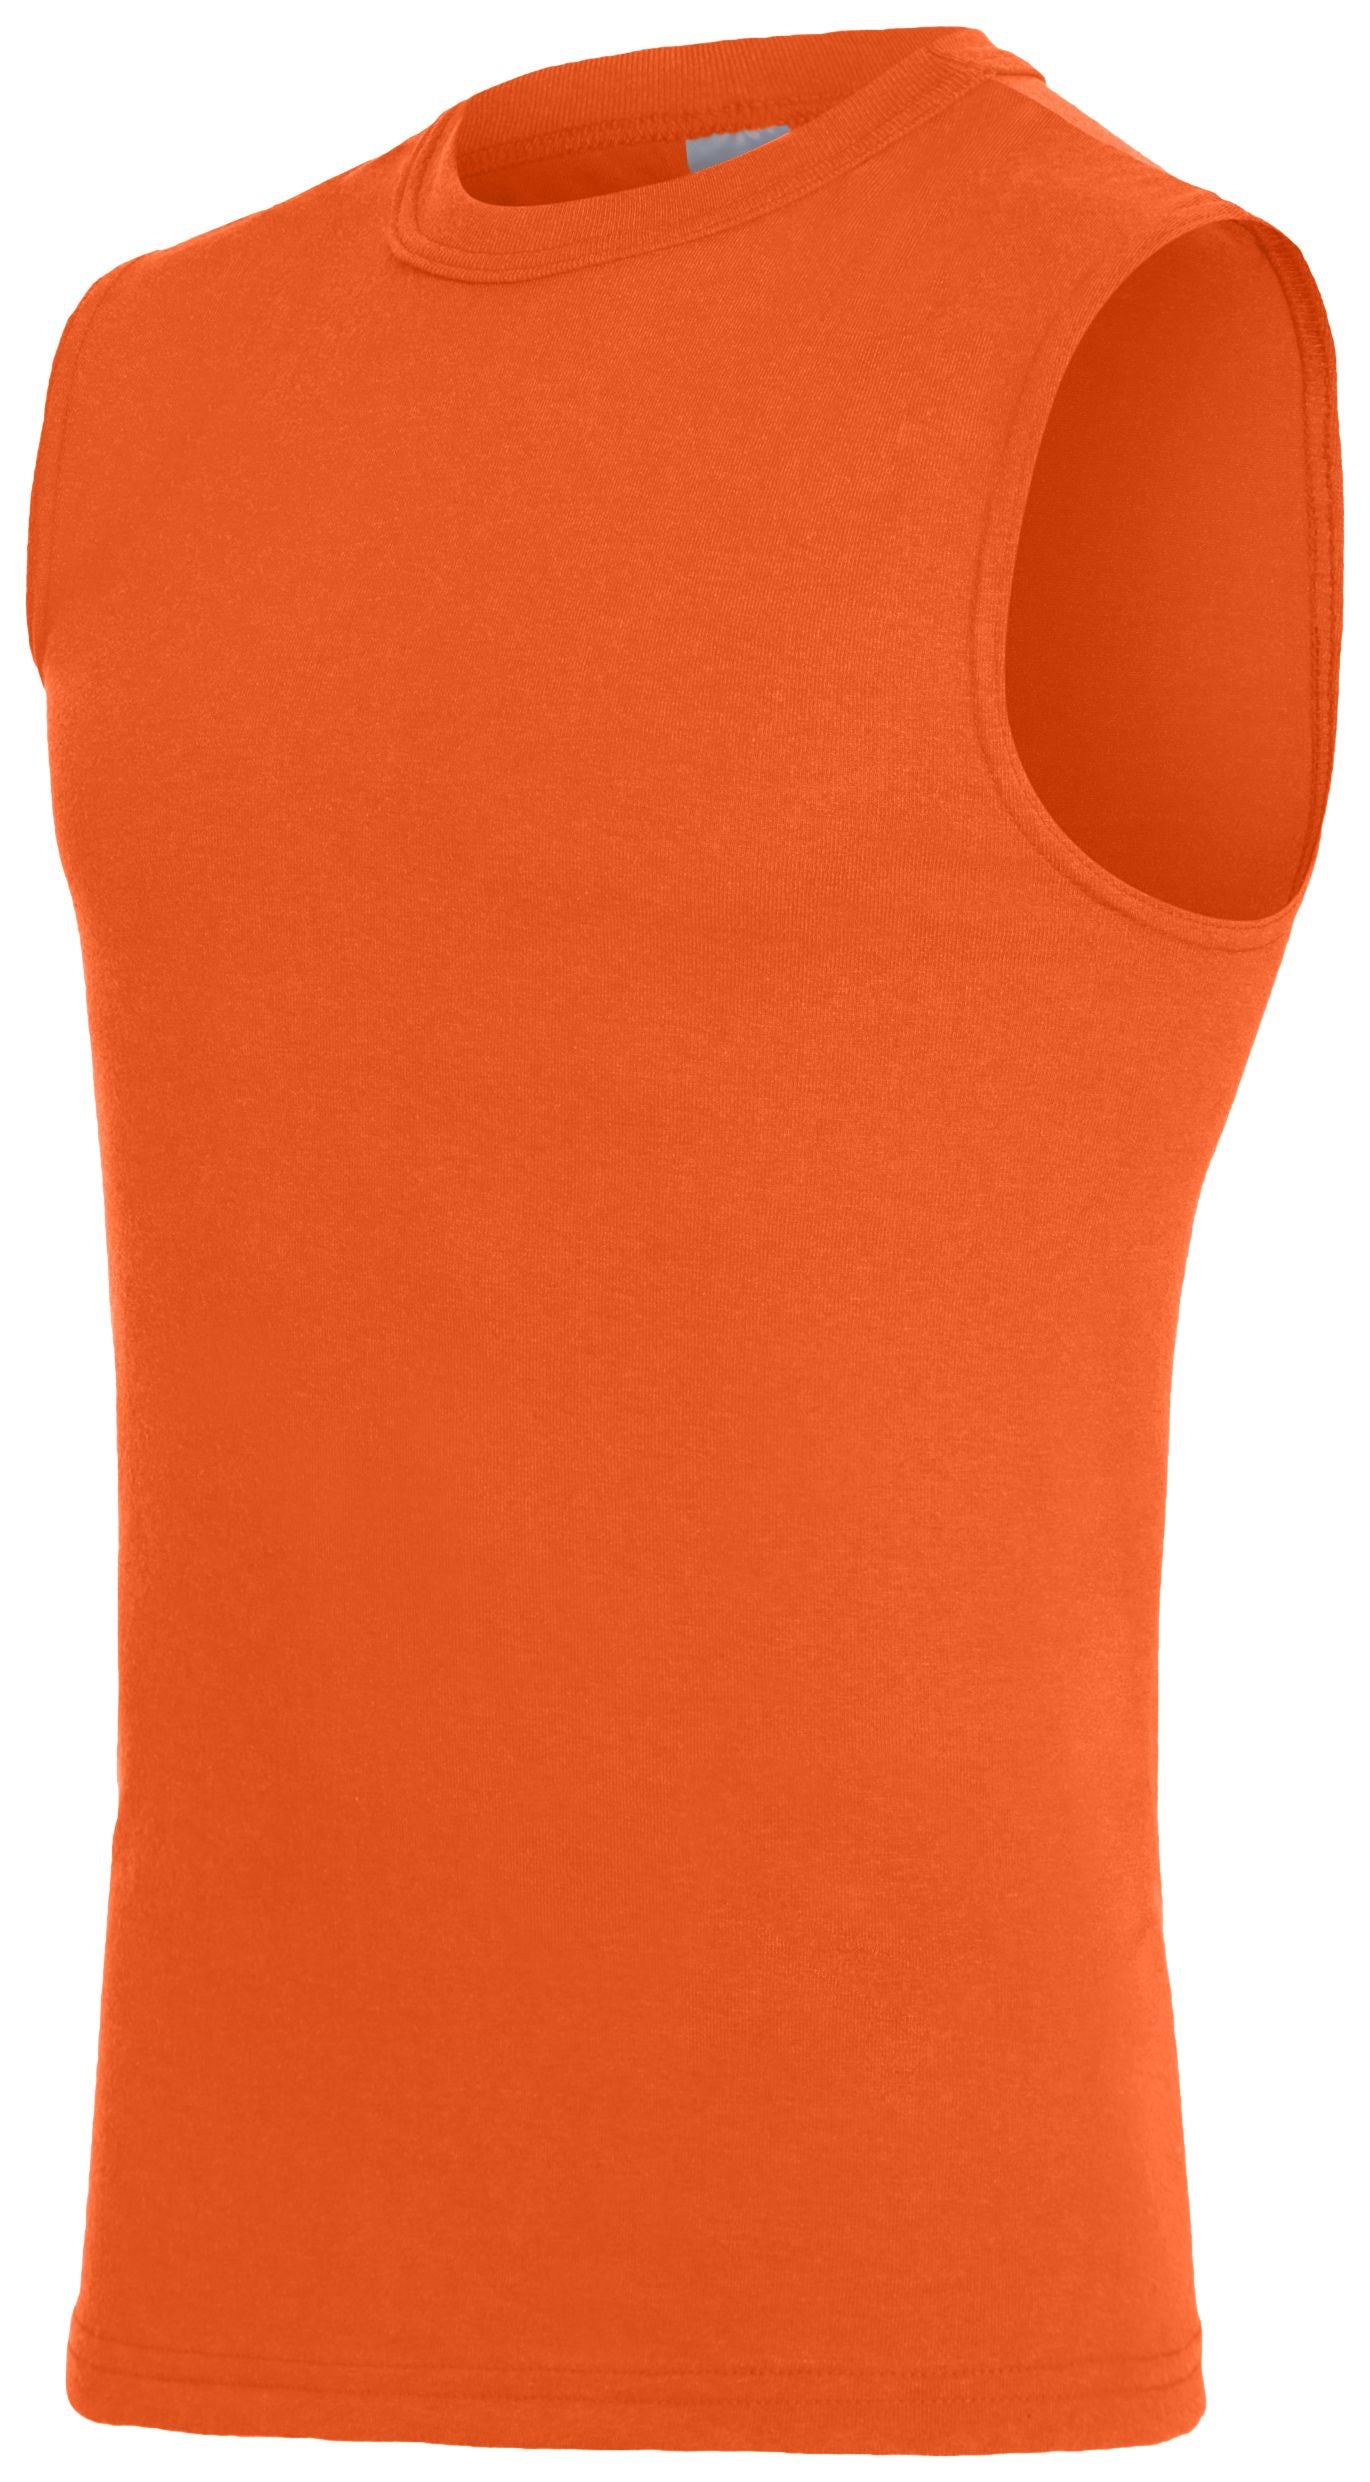 Augusta Sportswear Youth Shooter Shirt in Orange  -Part of the Youth, Youth-Jersey, Augusta-Products, Shirts product lines at KanaleyCreations.com